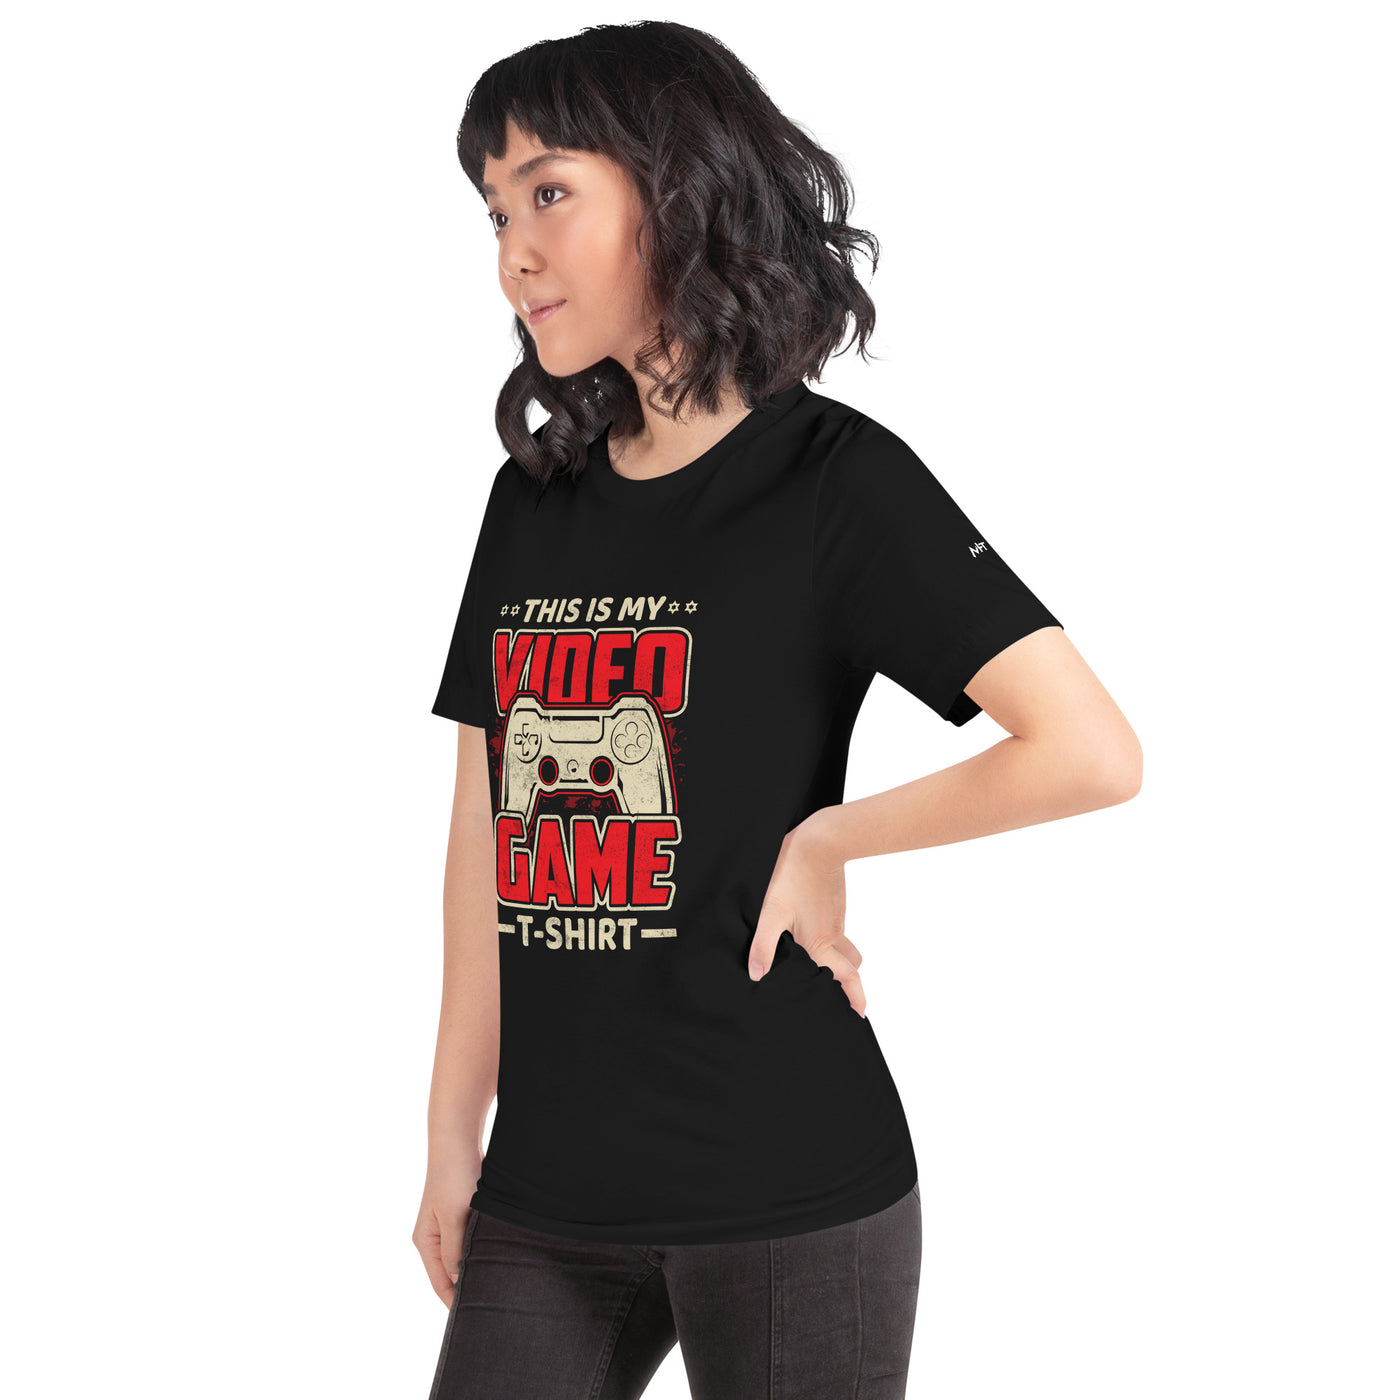 This is my Video Game - Unisex t-shirt